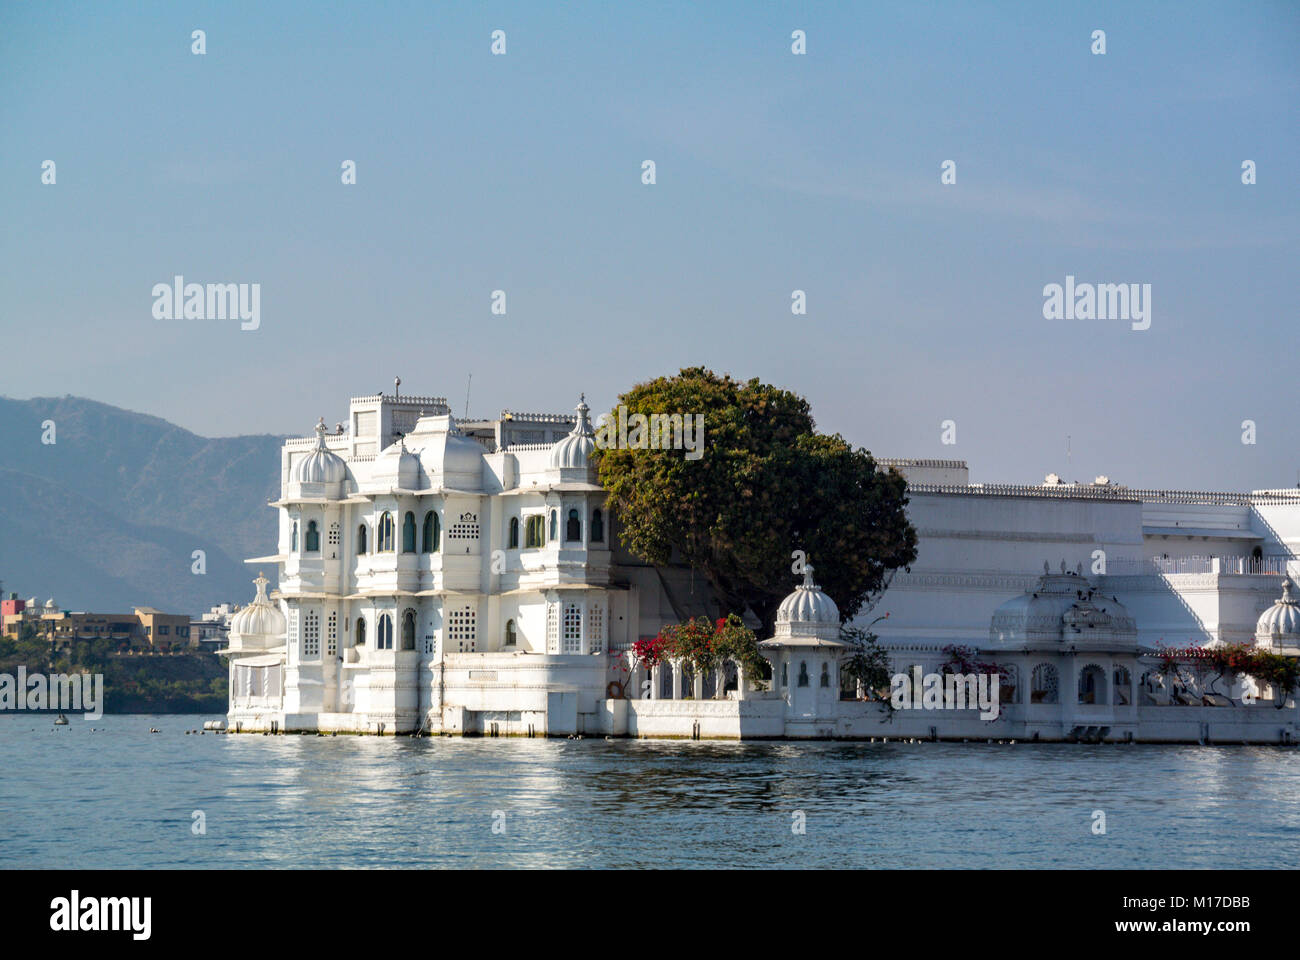 Udaipur City | Places To Visit In Udaipur | Udaipur History